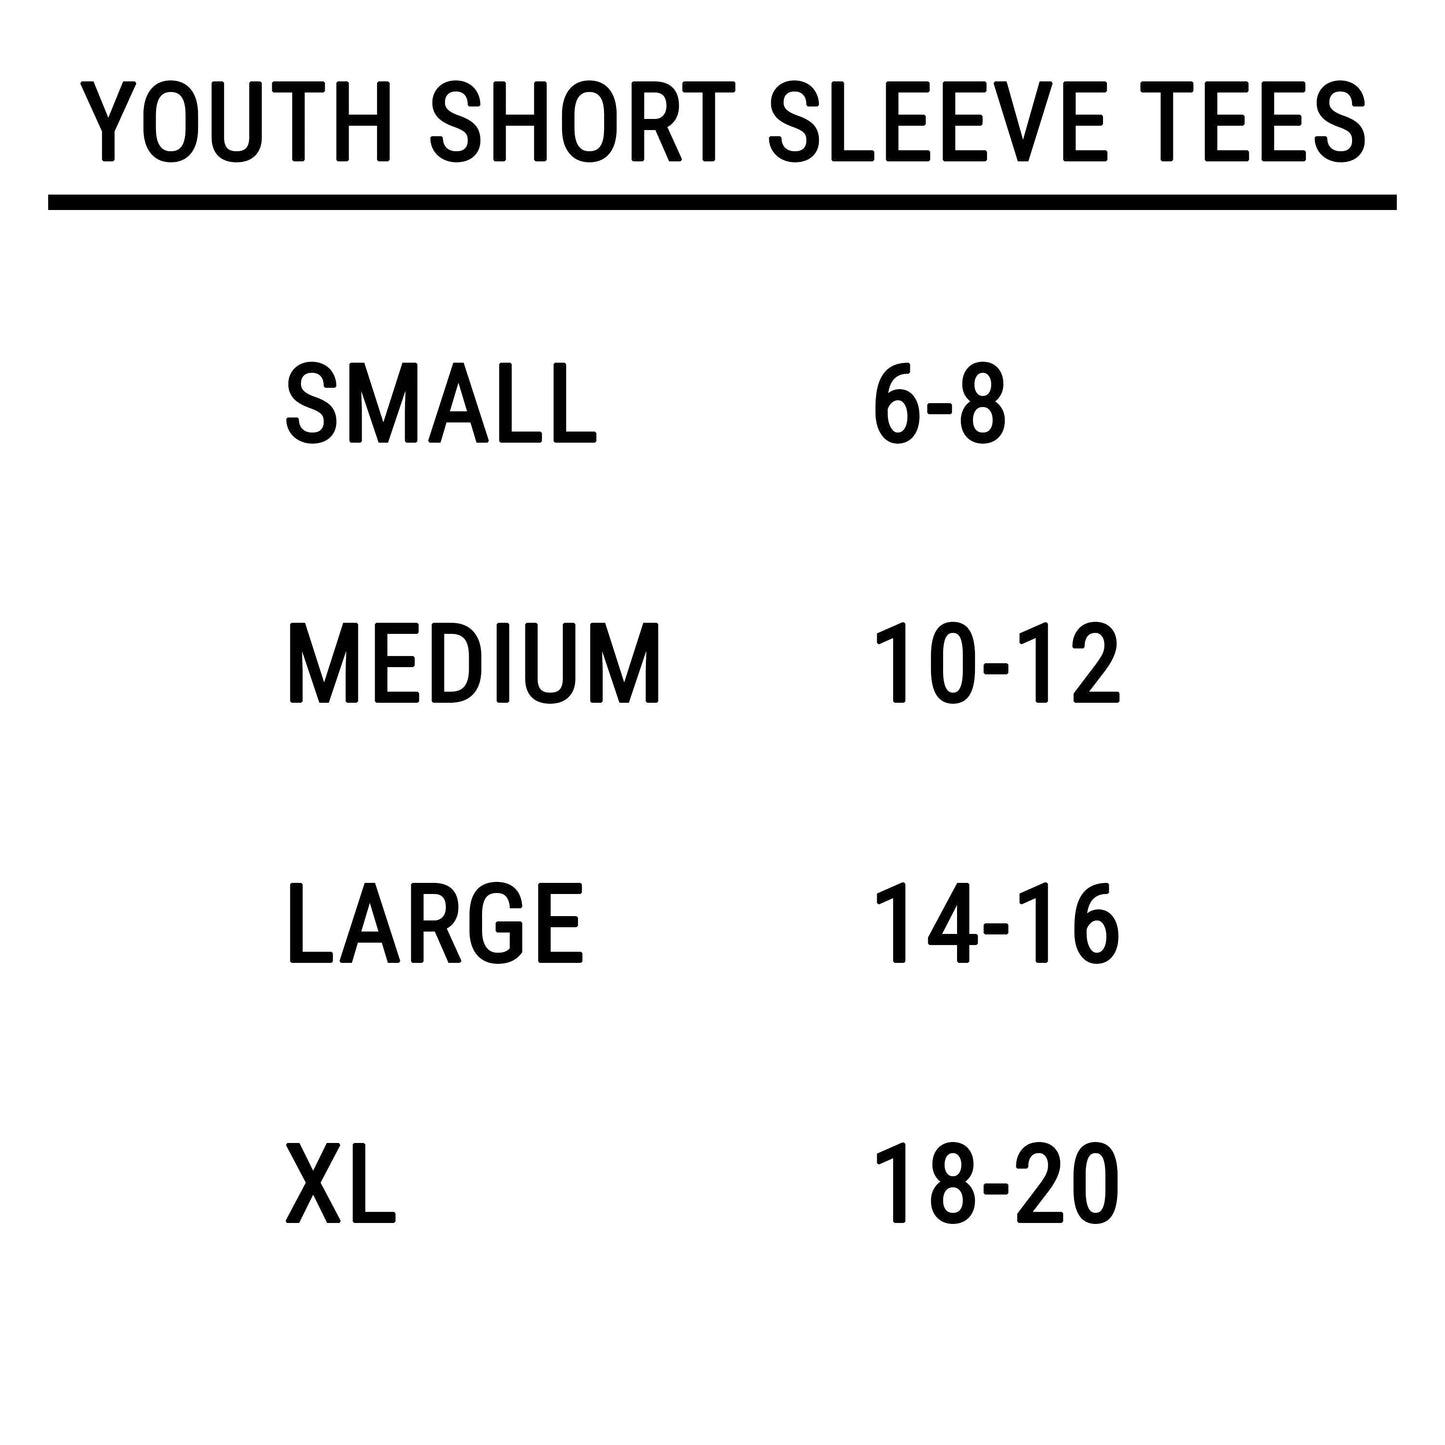 Professional Patience Tester | Youth Short Sleeve Crew Neck